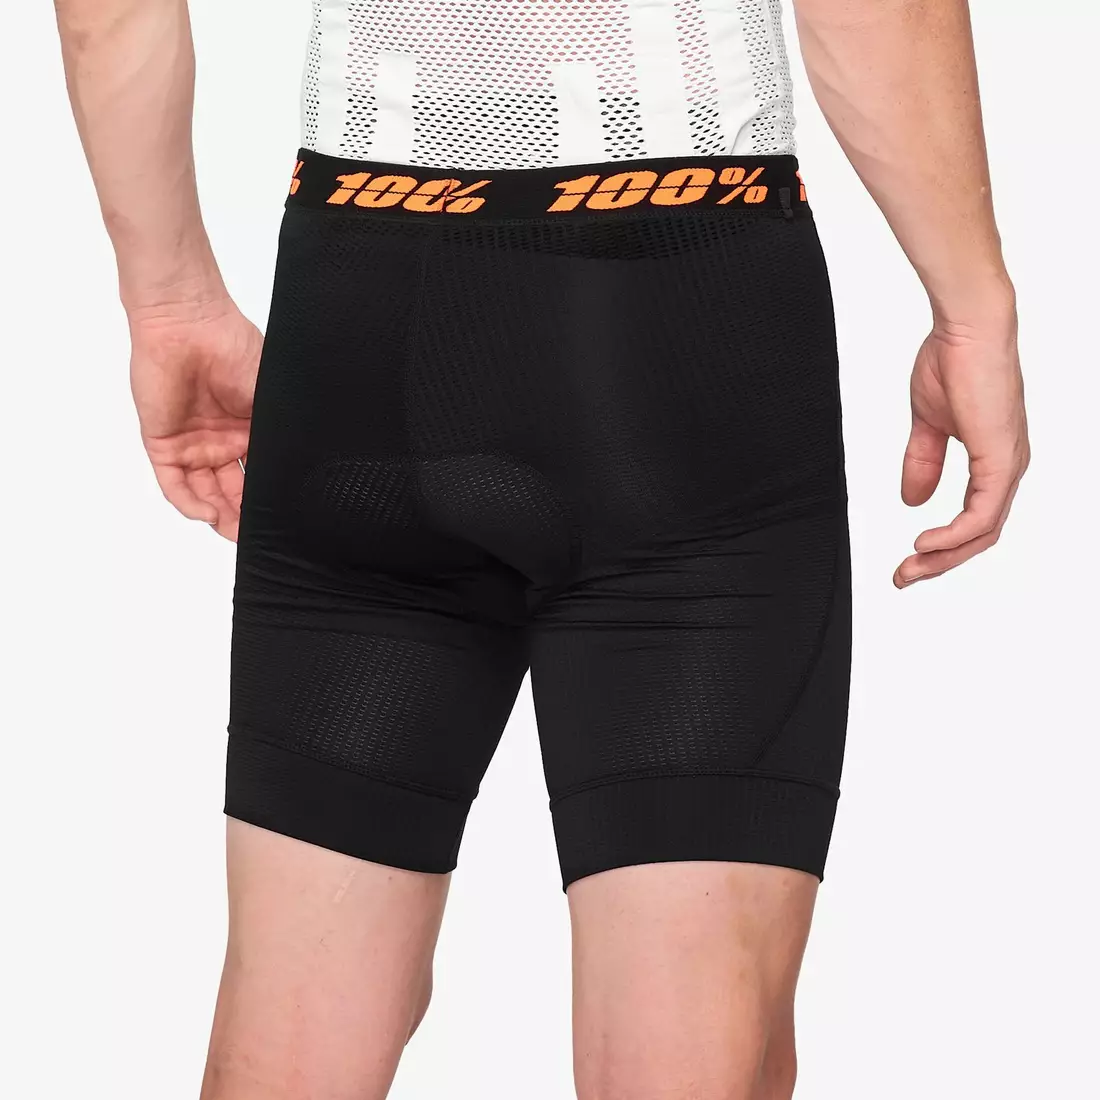 100% men's boxers with bicycle pads crux liner black STO-49901-001-28